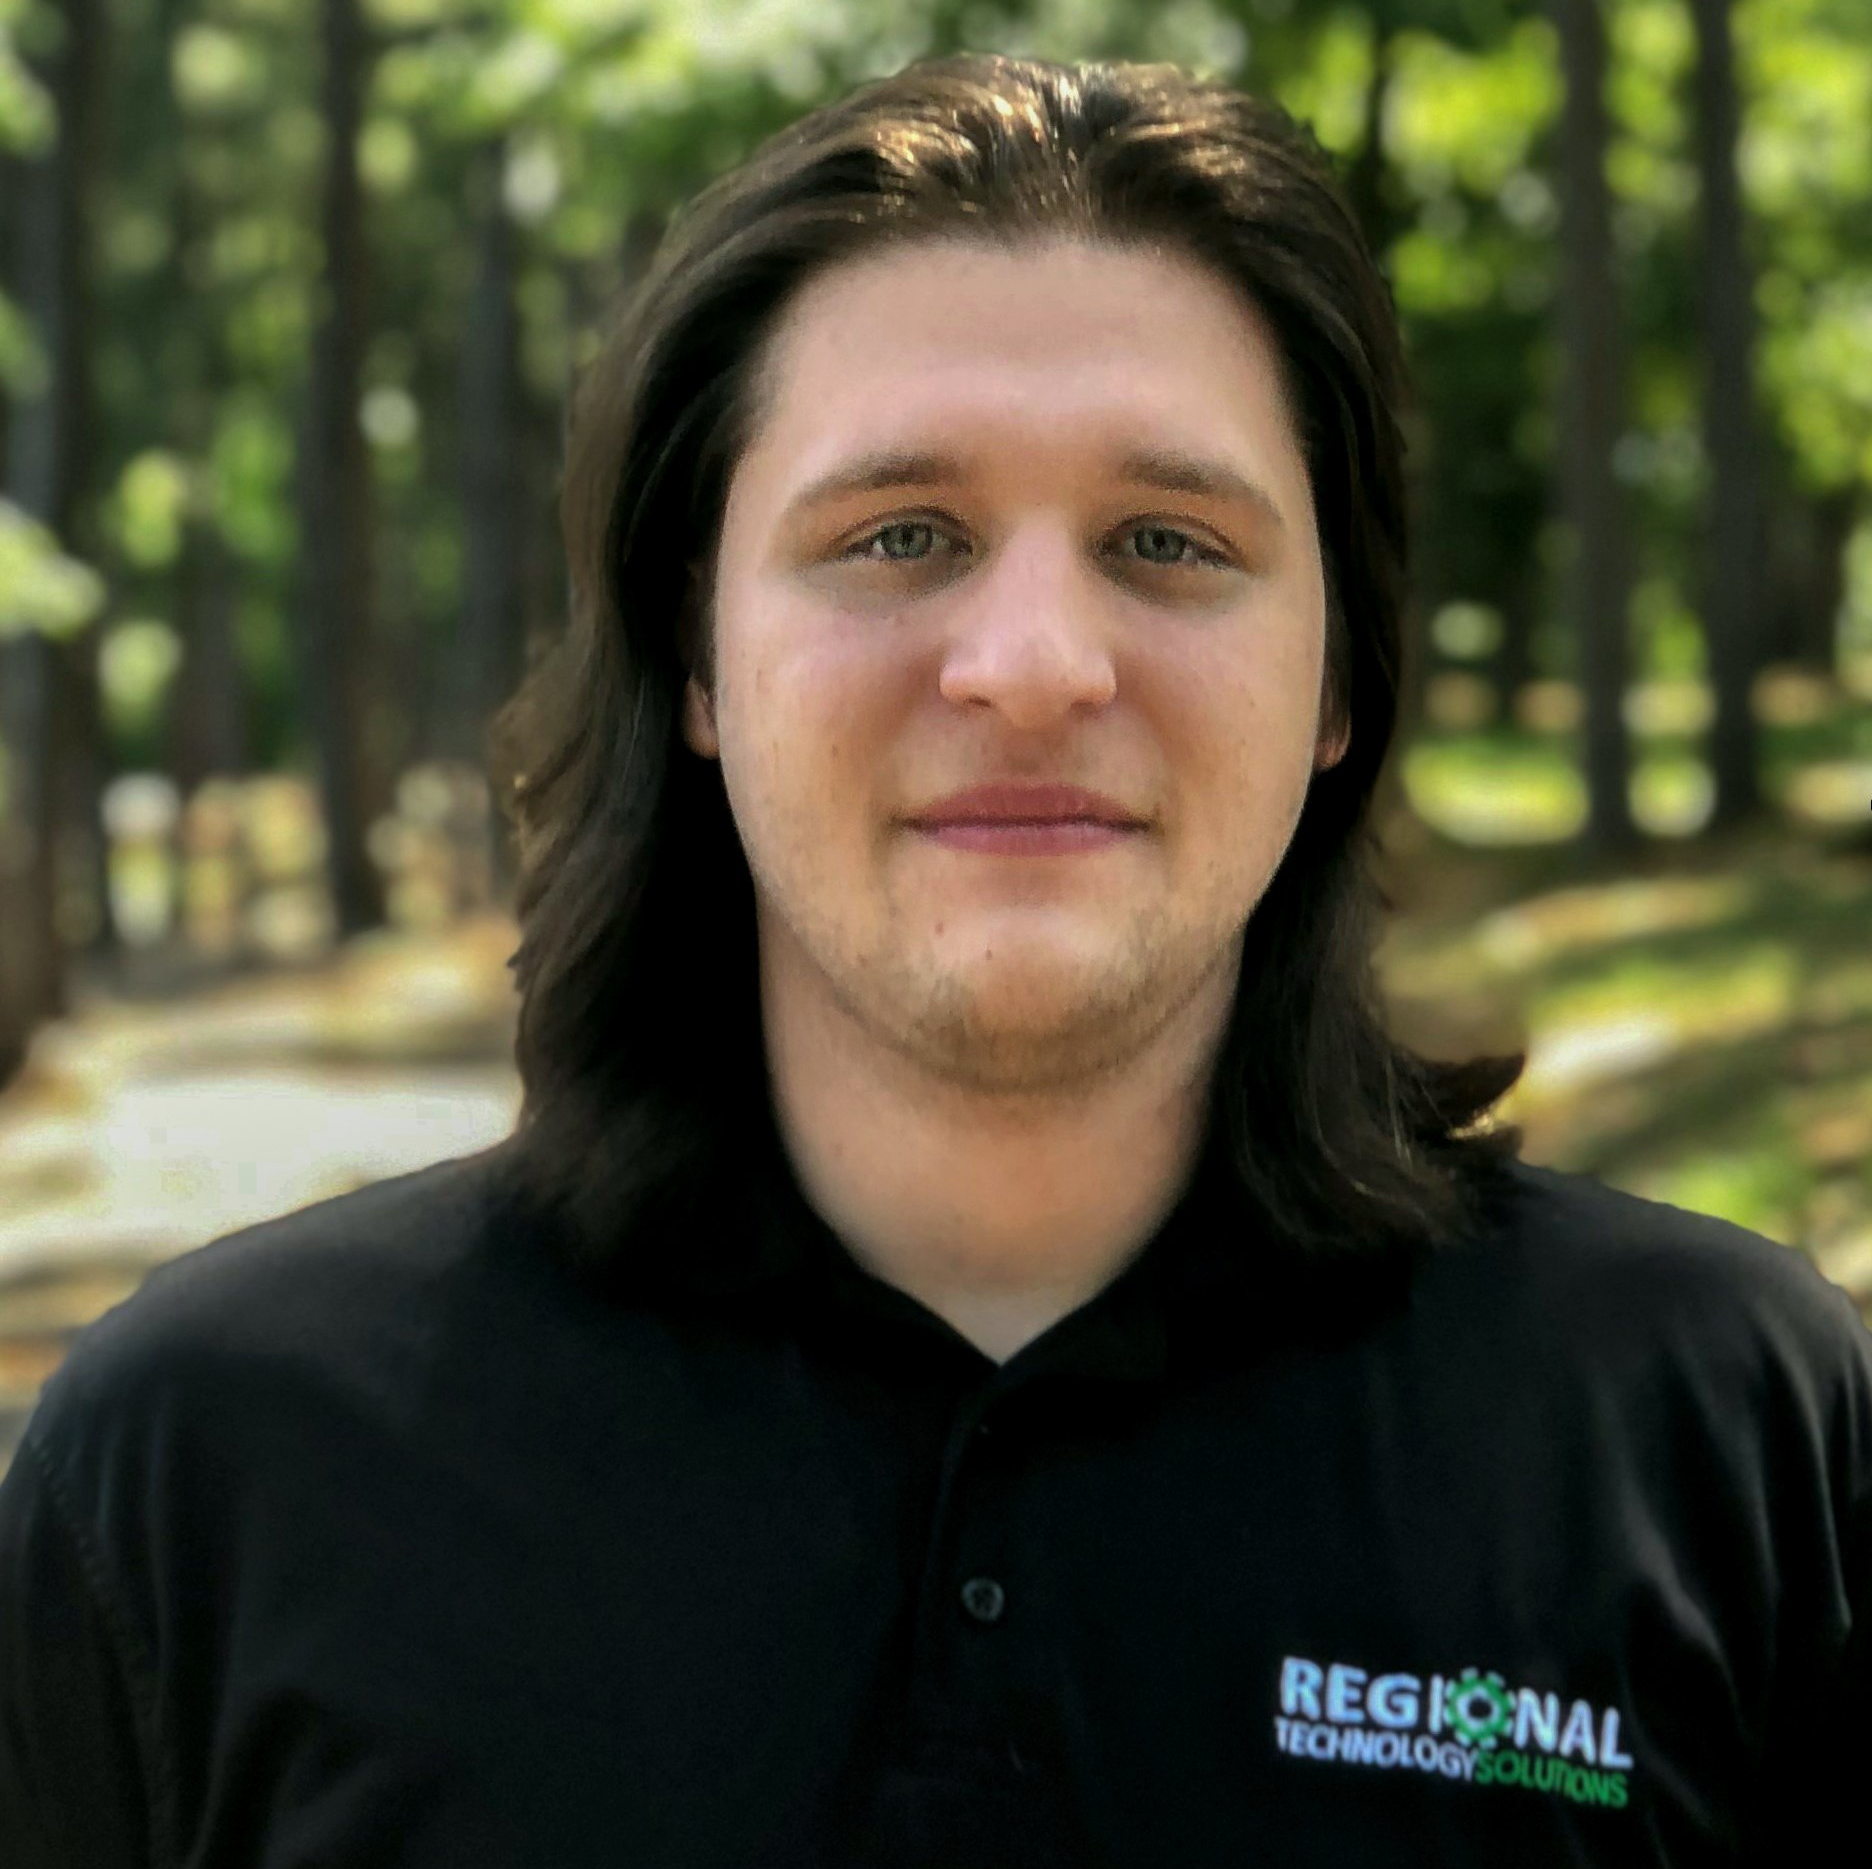 A young man with long hair is wearing a black shirt that says regional technology solutions.